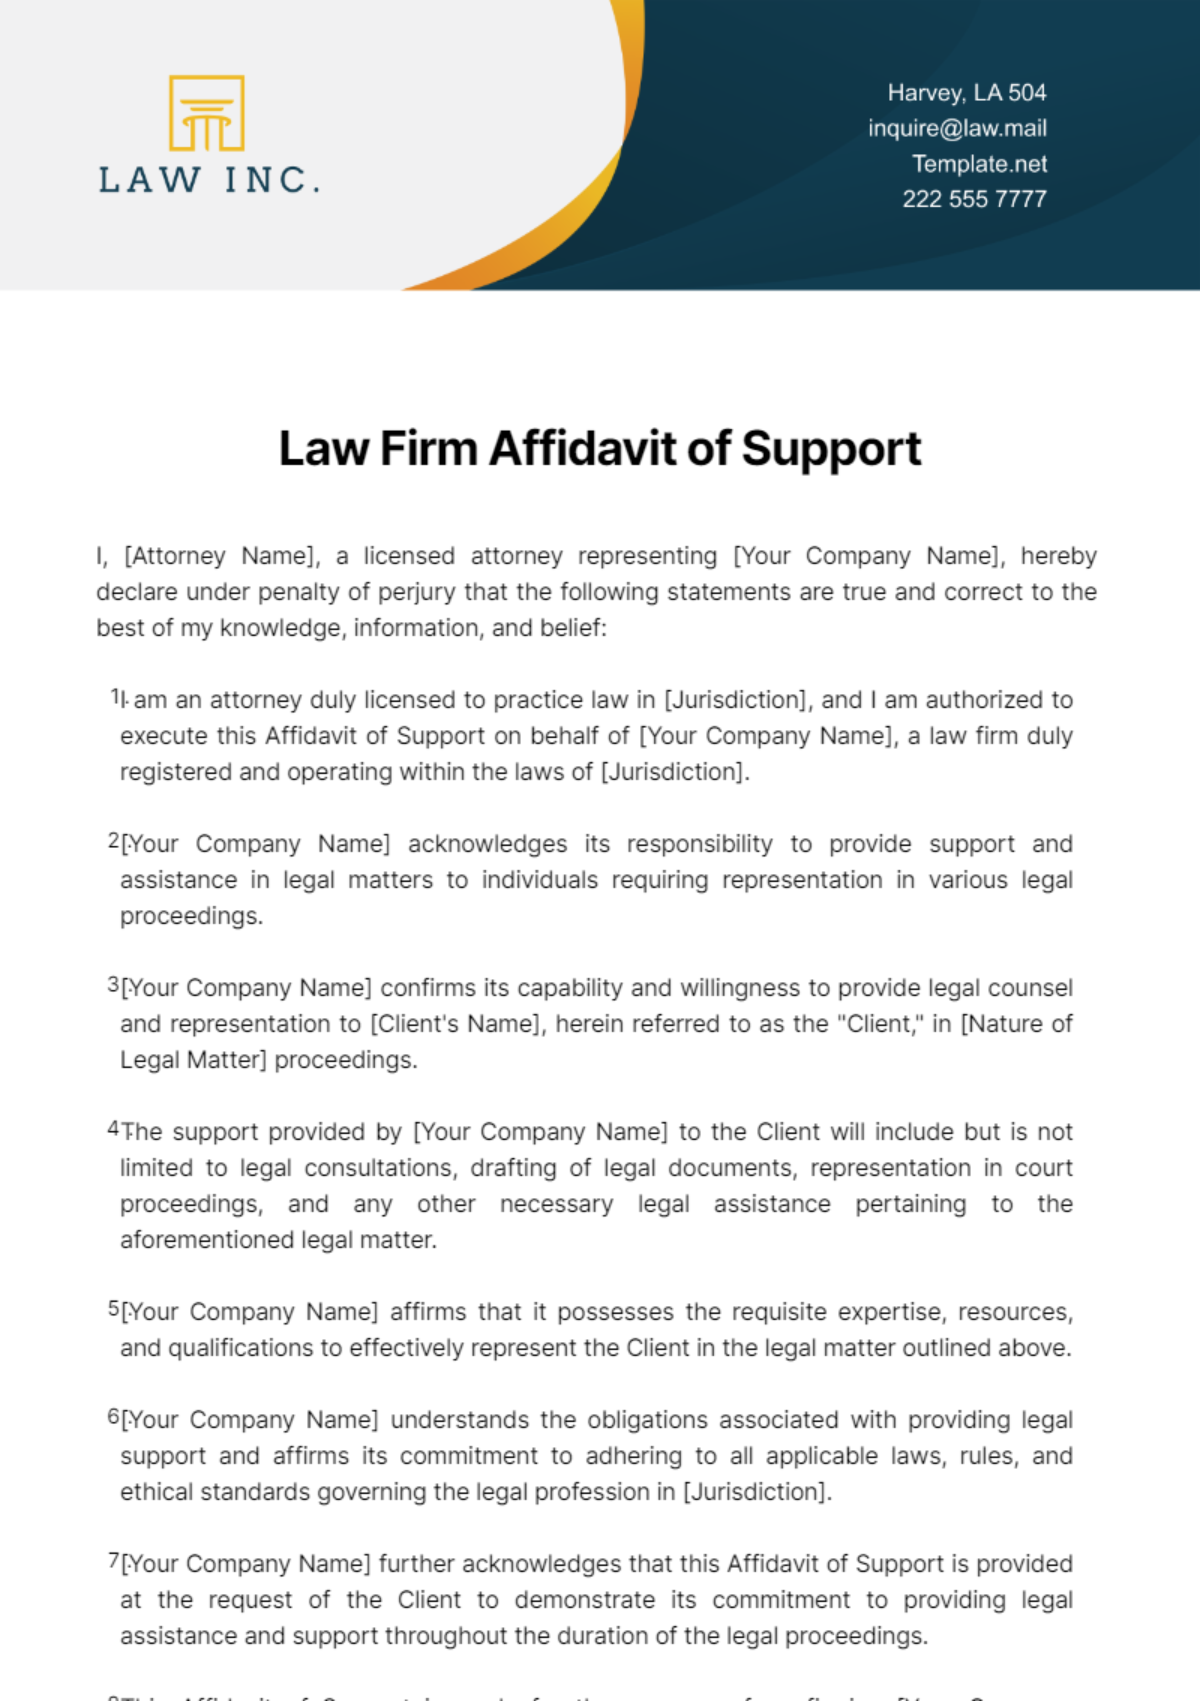 Law Firm Affidavit of Support Template